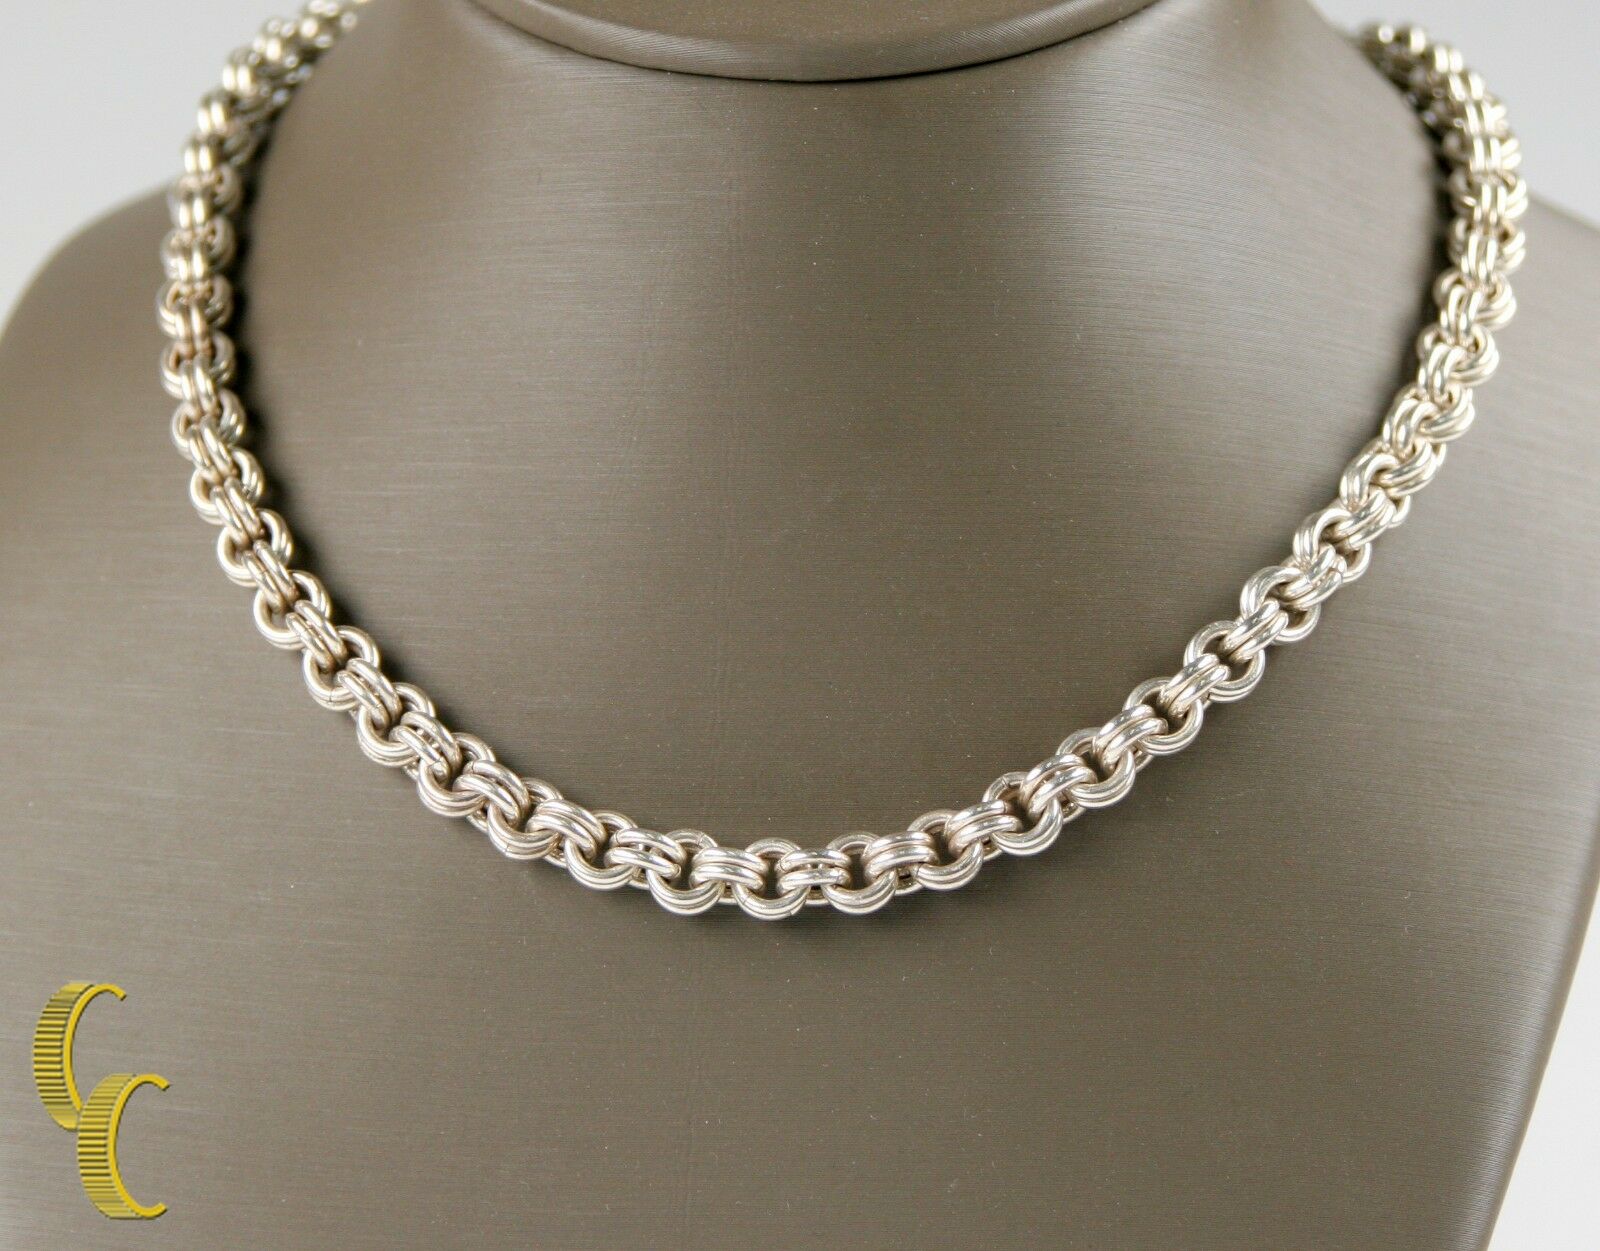 Men's Sterling Silver Double Rolo Chain Necklace w/ Toggle Clasp 23